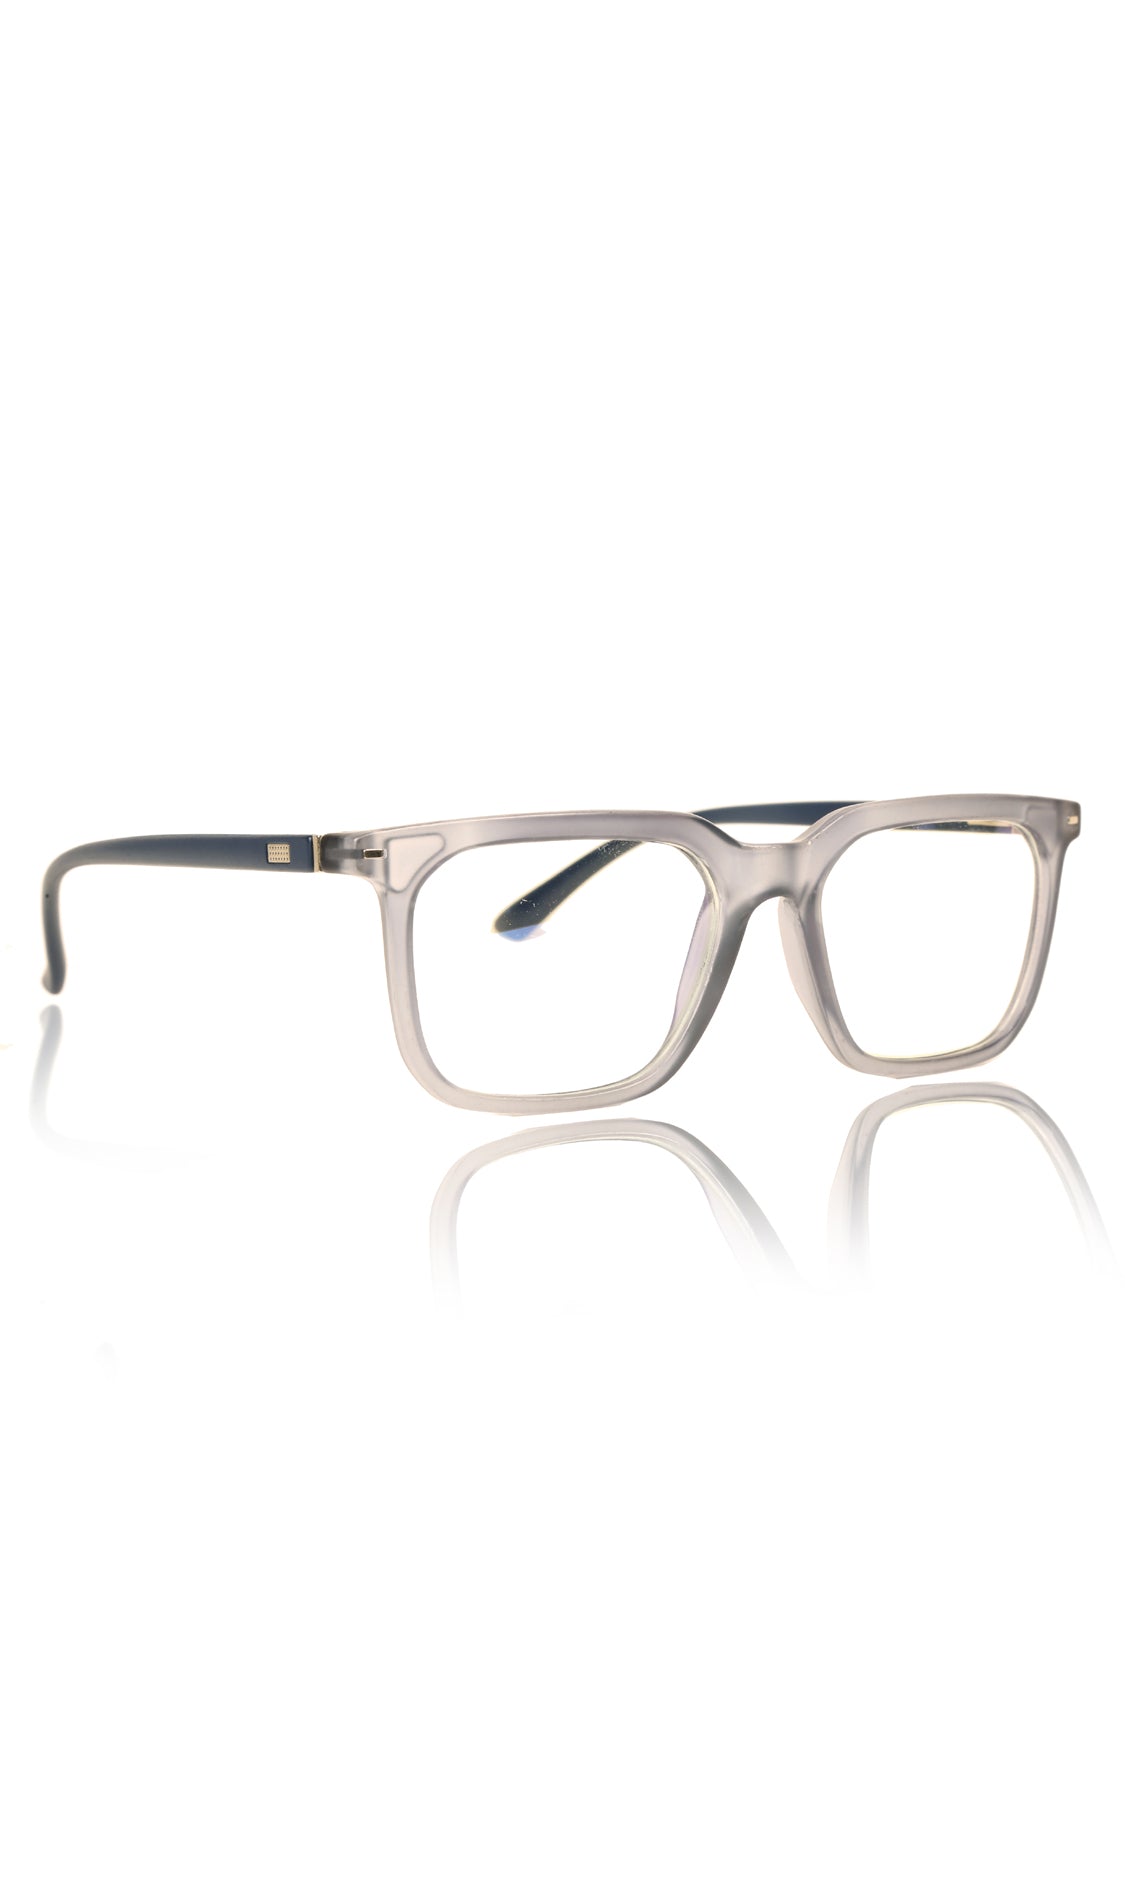 Jodykoes® Colour Frame Series: Stylish Square Spectacle Frames with Blue Ray Protection and Anti-Glare Glasses for Men and Women (Frost Transparent Blue) - Jodykoes ®